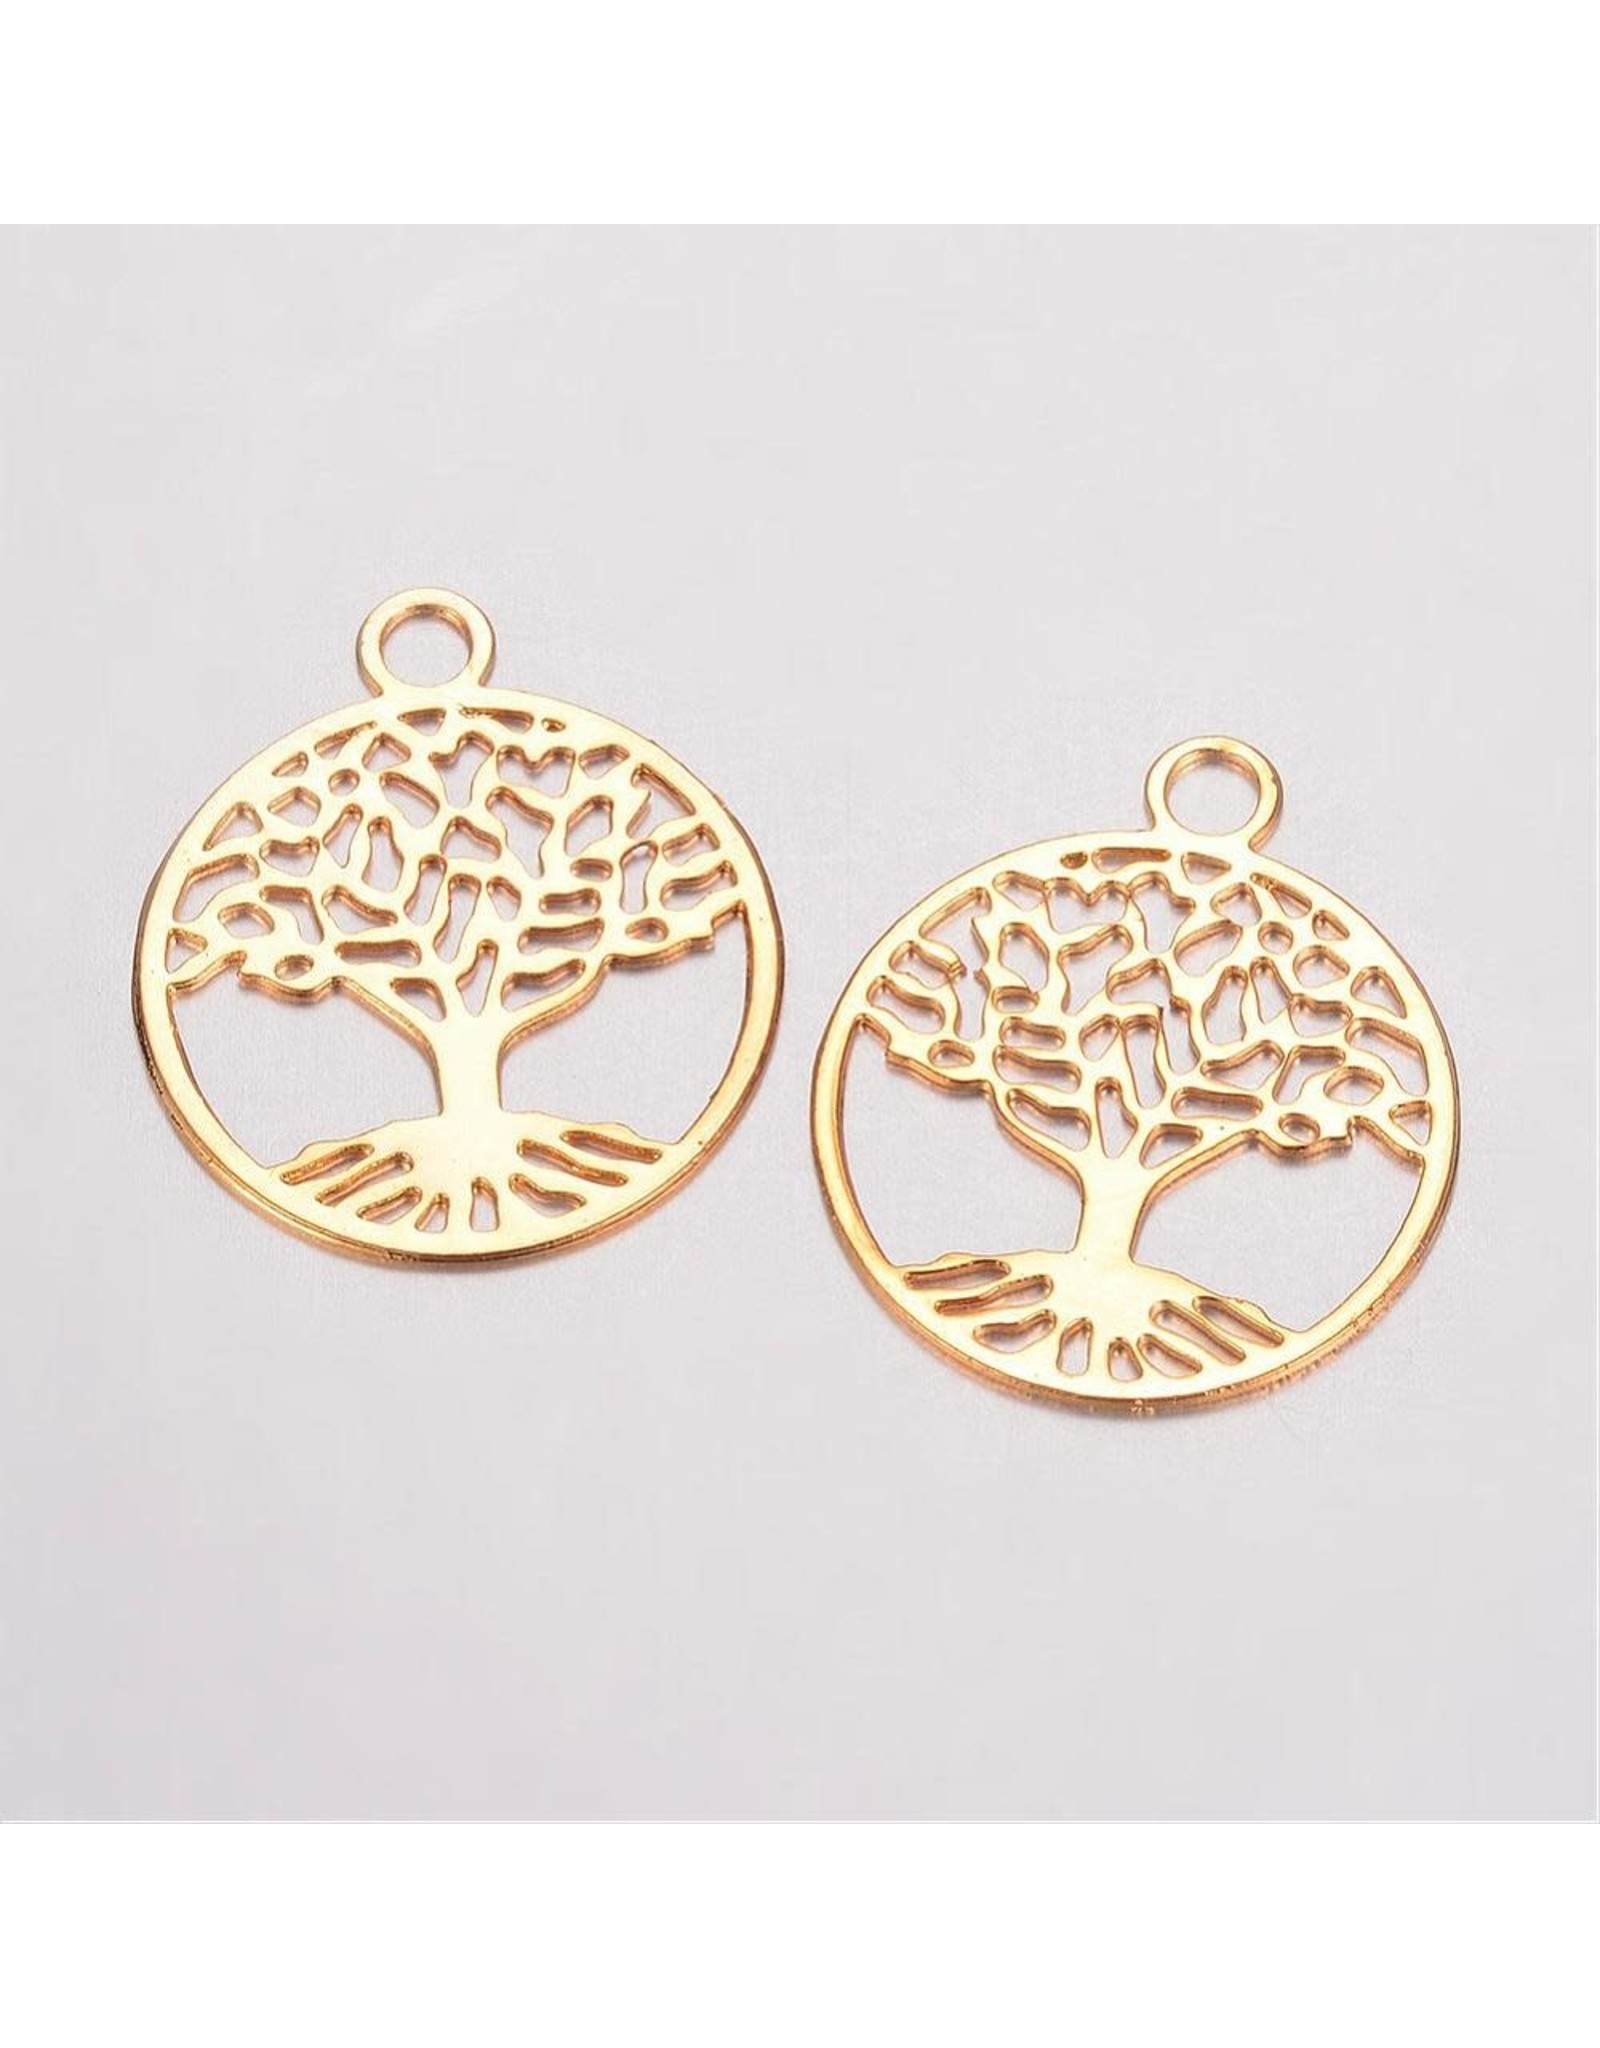 Tree of Life  24x20mm  Gold  NF  x6